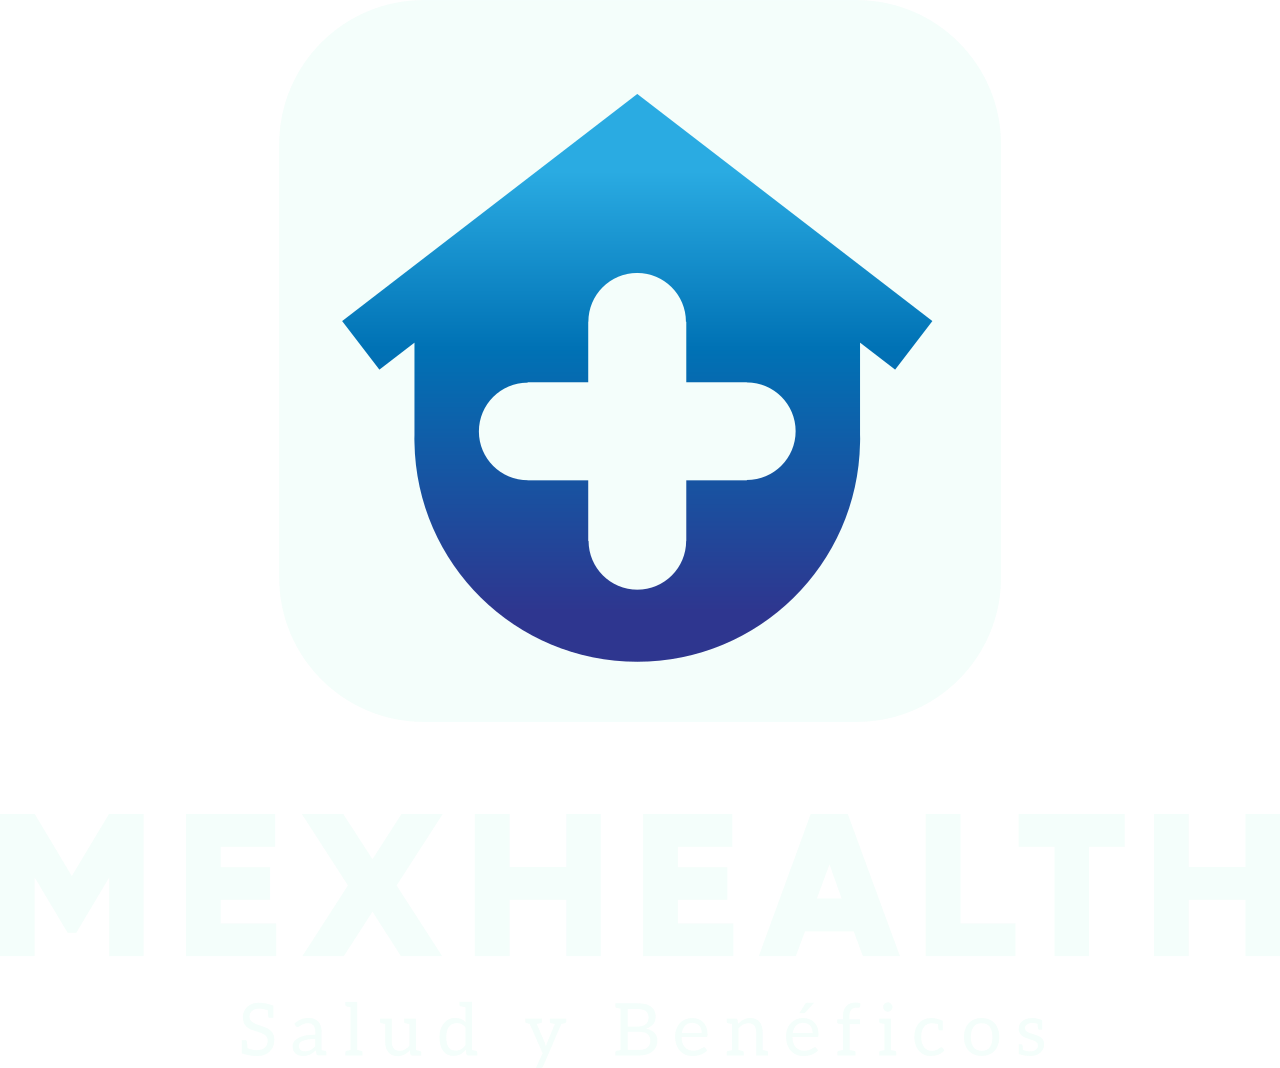 Mexhealth's web page